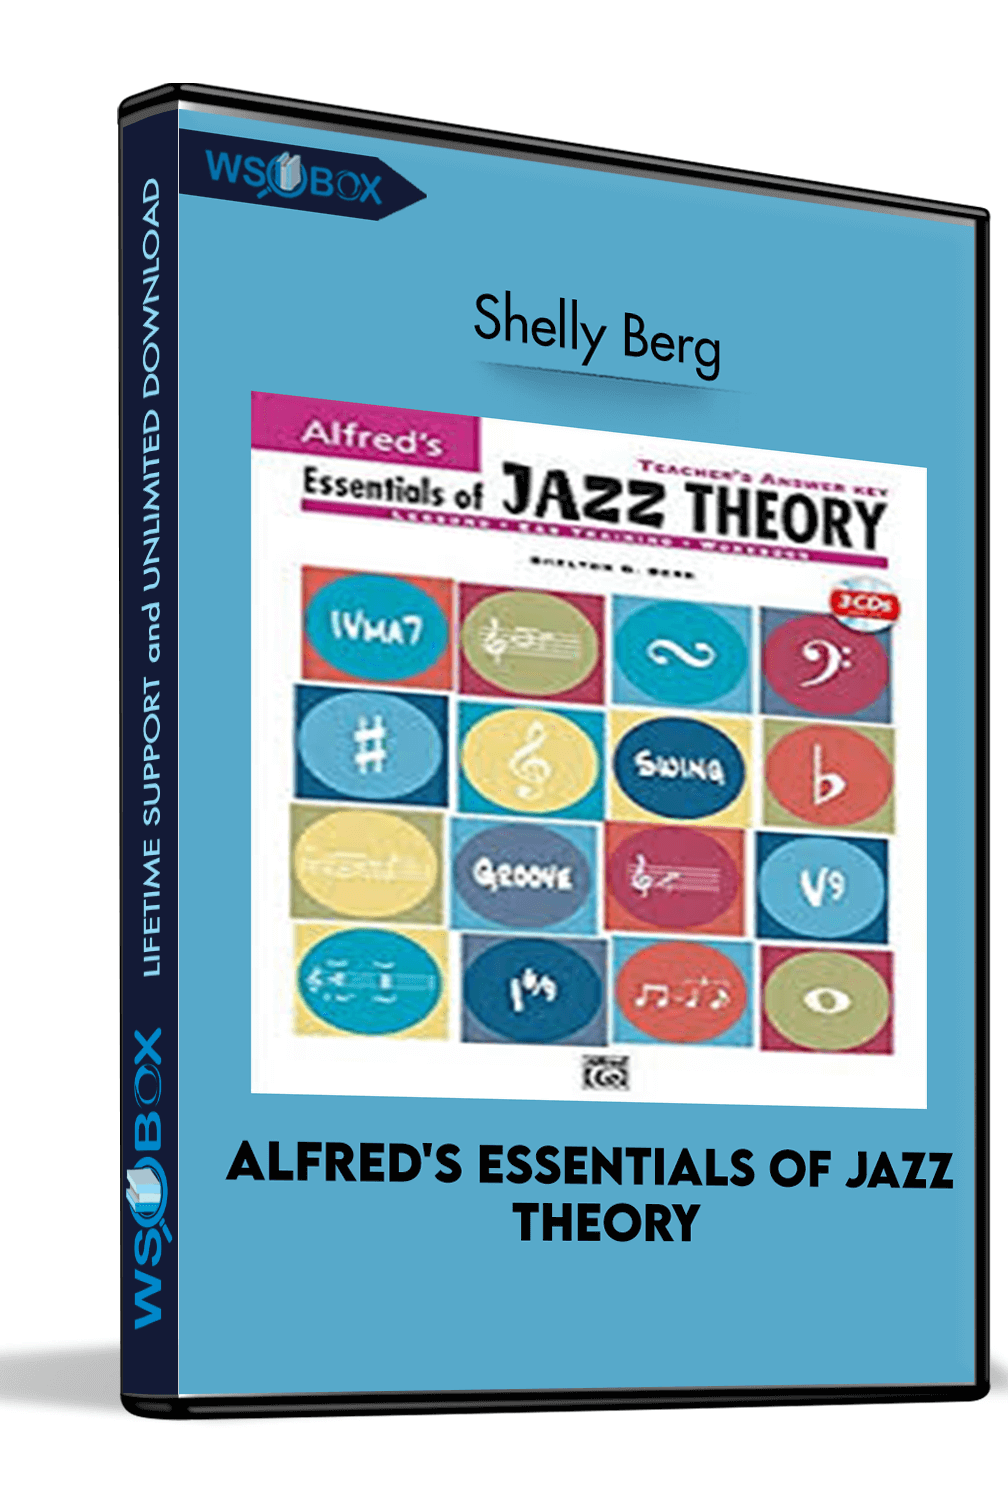 alfreds-essentials-of-jazz-theory-shelly-berg